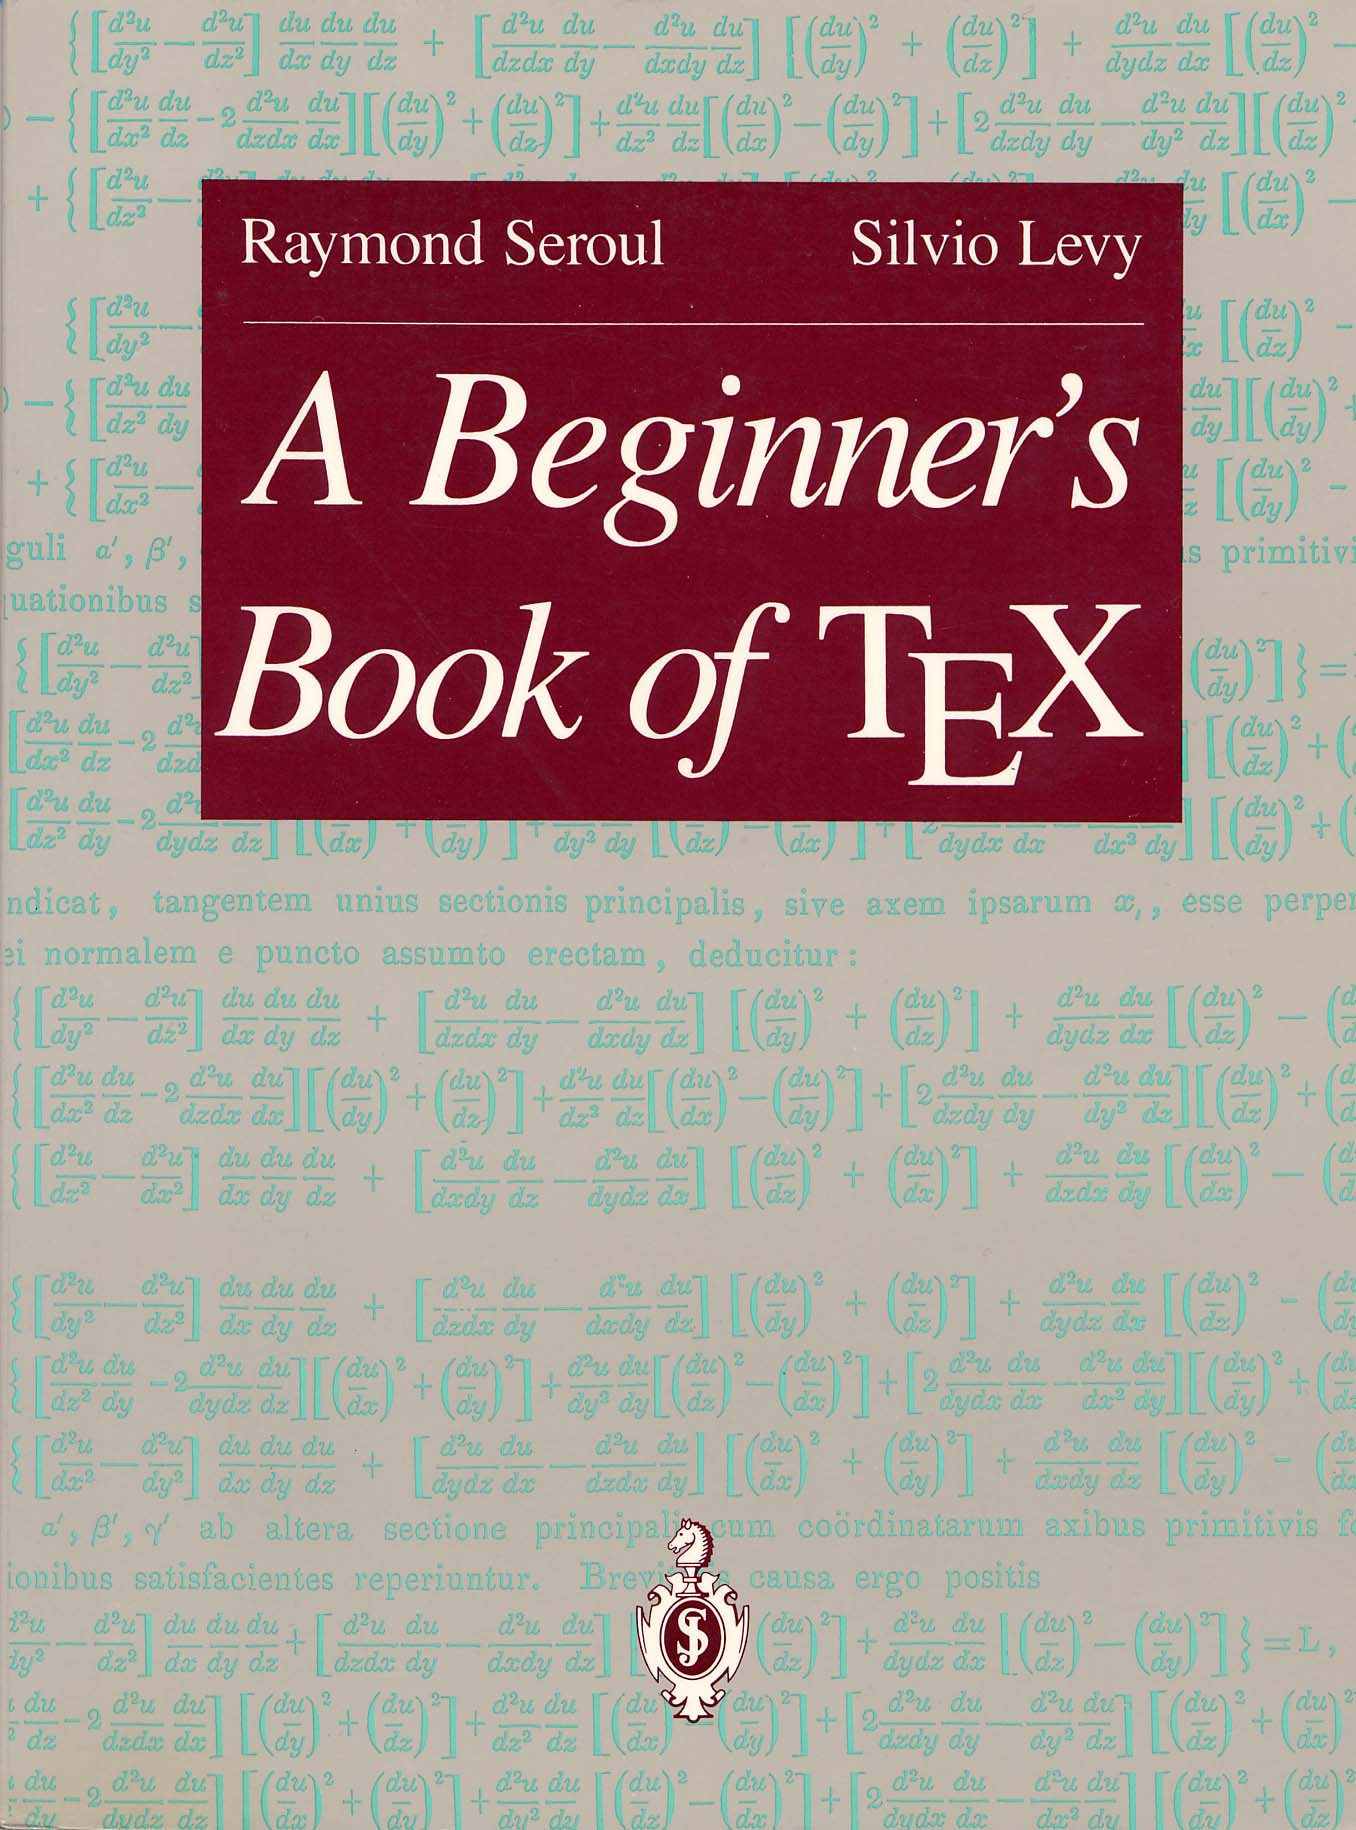 Cover of "A Beginner's Book of TeX" by R. Seroul and S. Levy.